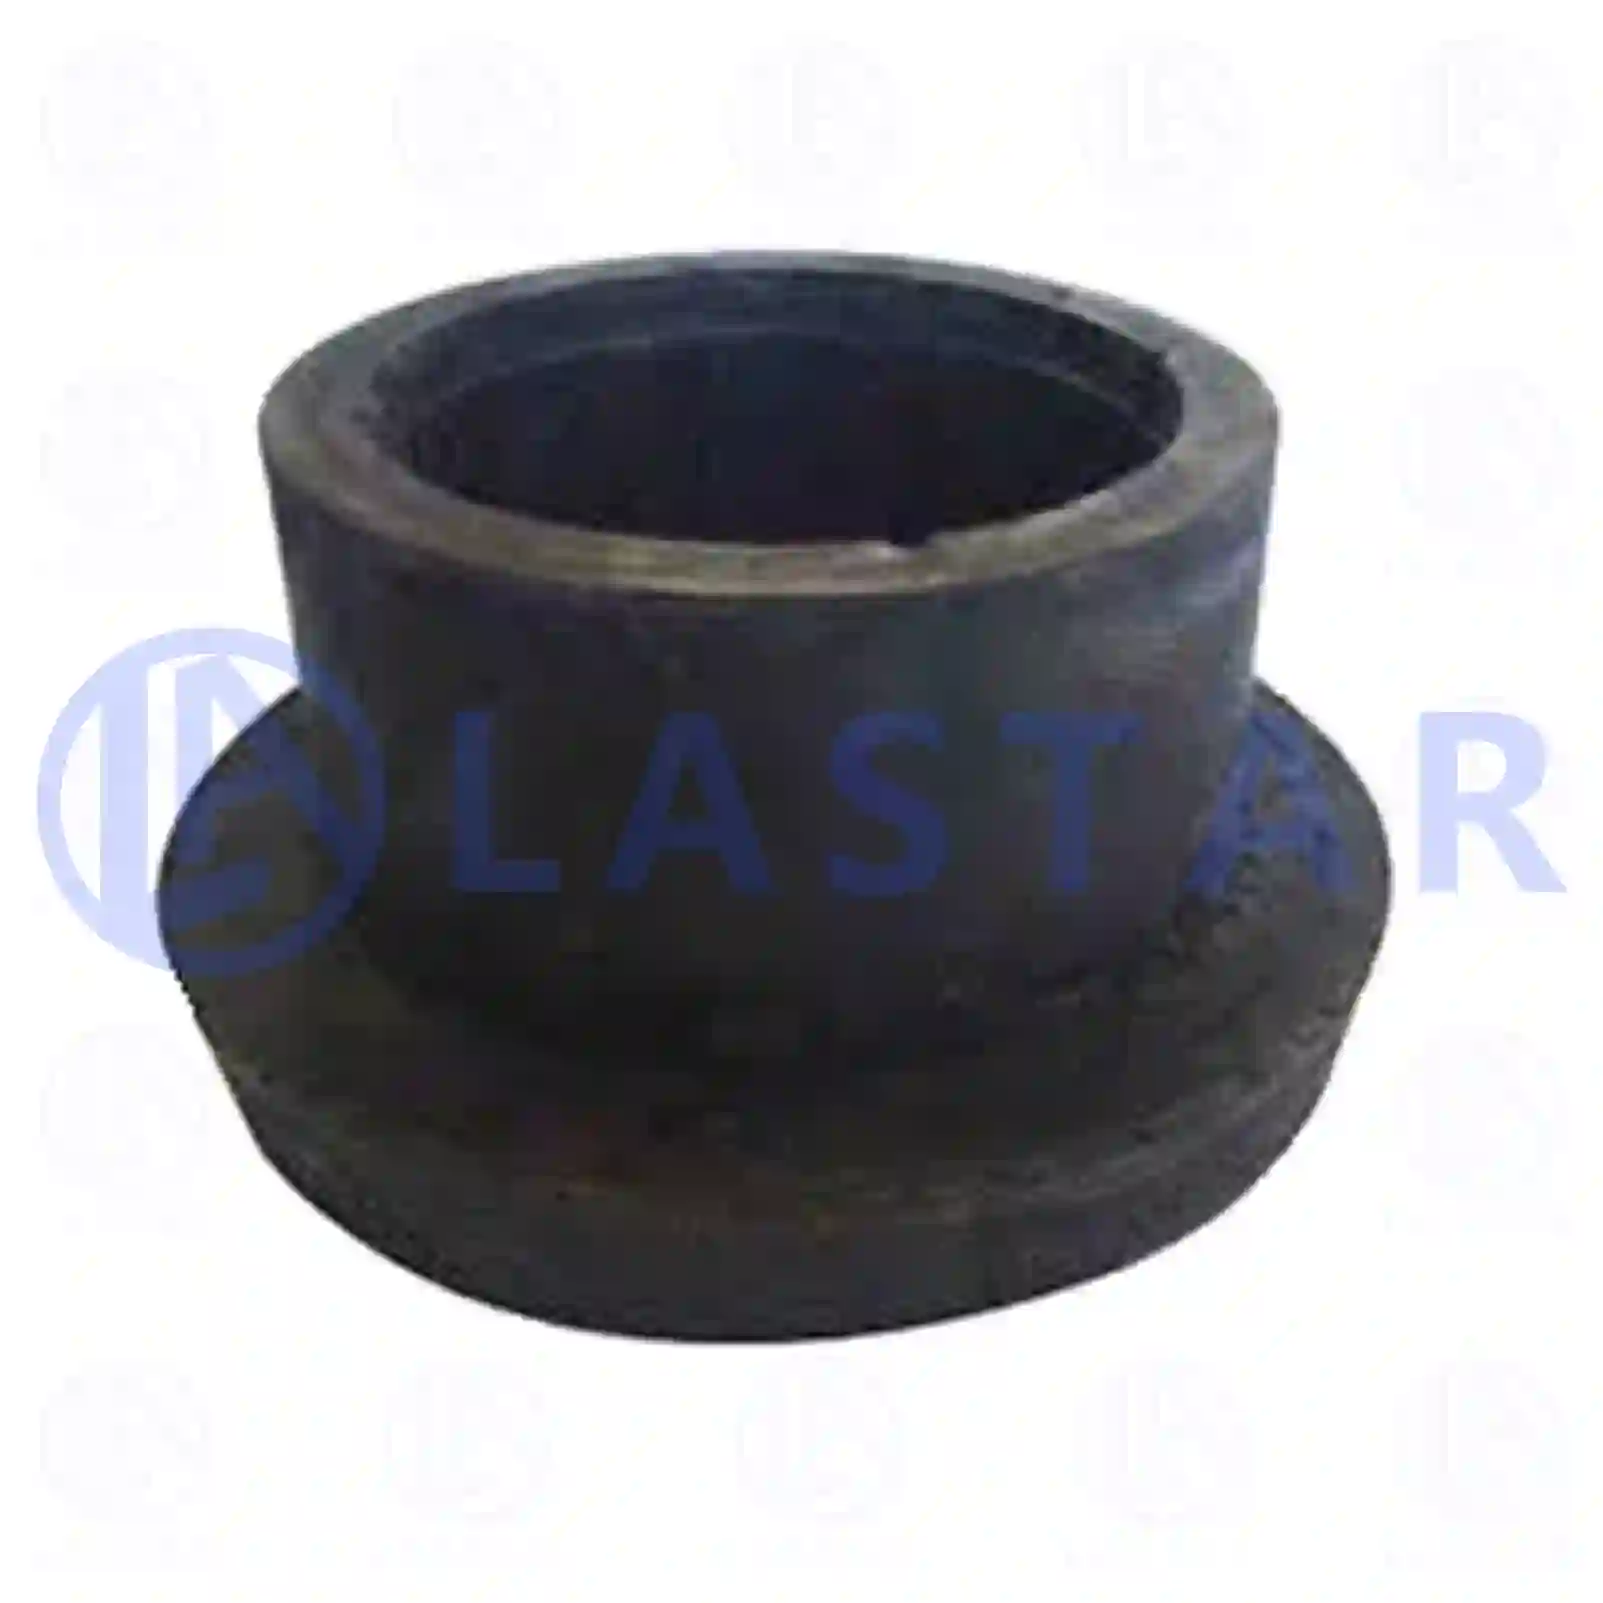 Rubber mounting, spring saddle, 77727531, 81962100507, 81962100508, 9603250085, 2V5701799A ||  77727531 Lastar Spare Part | Truck Spare Parts, Auotomotive Spare Parts Rubber mounting, spring saddle, 77727531, 81962100507, 81962100508, 9603250085, 2V5701799A ||  77727531 Lastar Spare Part | Truck Spare Parts, Auotomotive Spare Parts